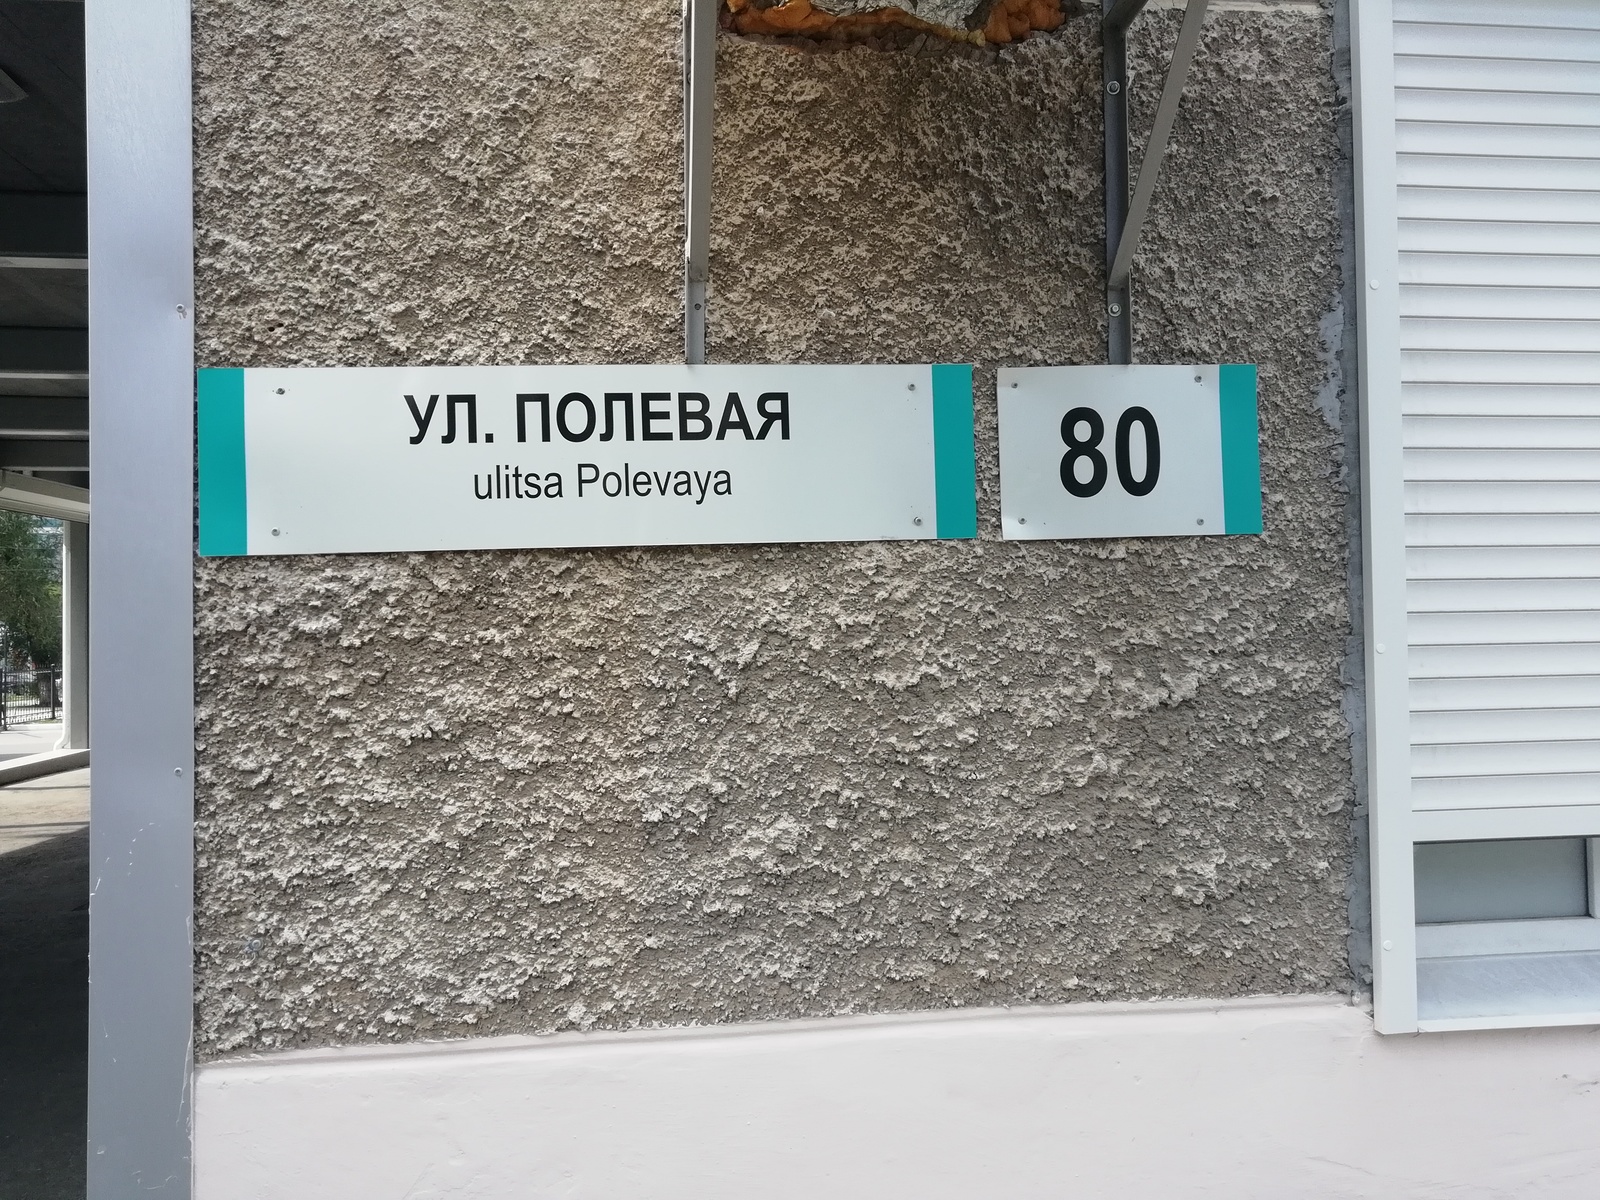 Apparently some kind of polyglot translated. For the World Cup 2018, Samara - My, Humor, The photo, 2018 FIFA World Cup, The street, Name, Transliteration, Transliteration